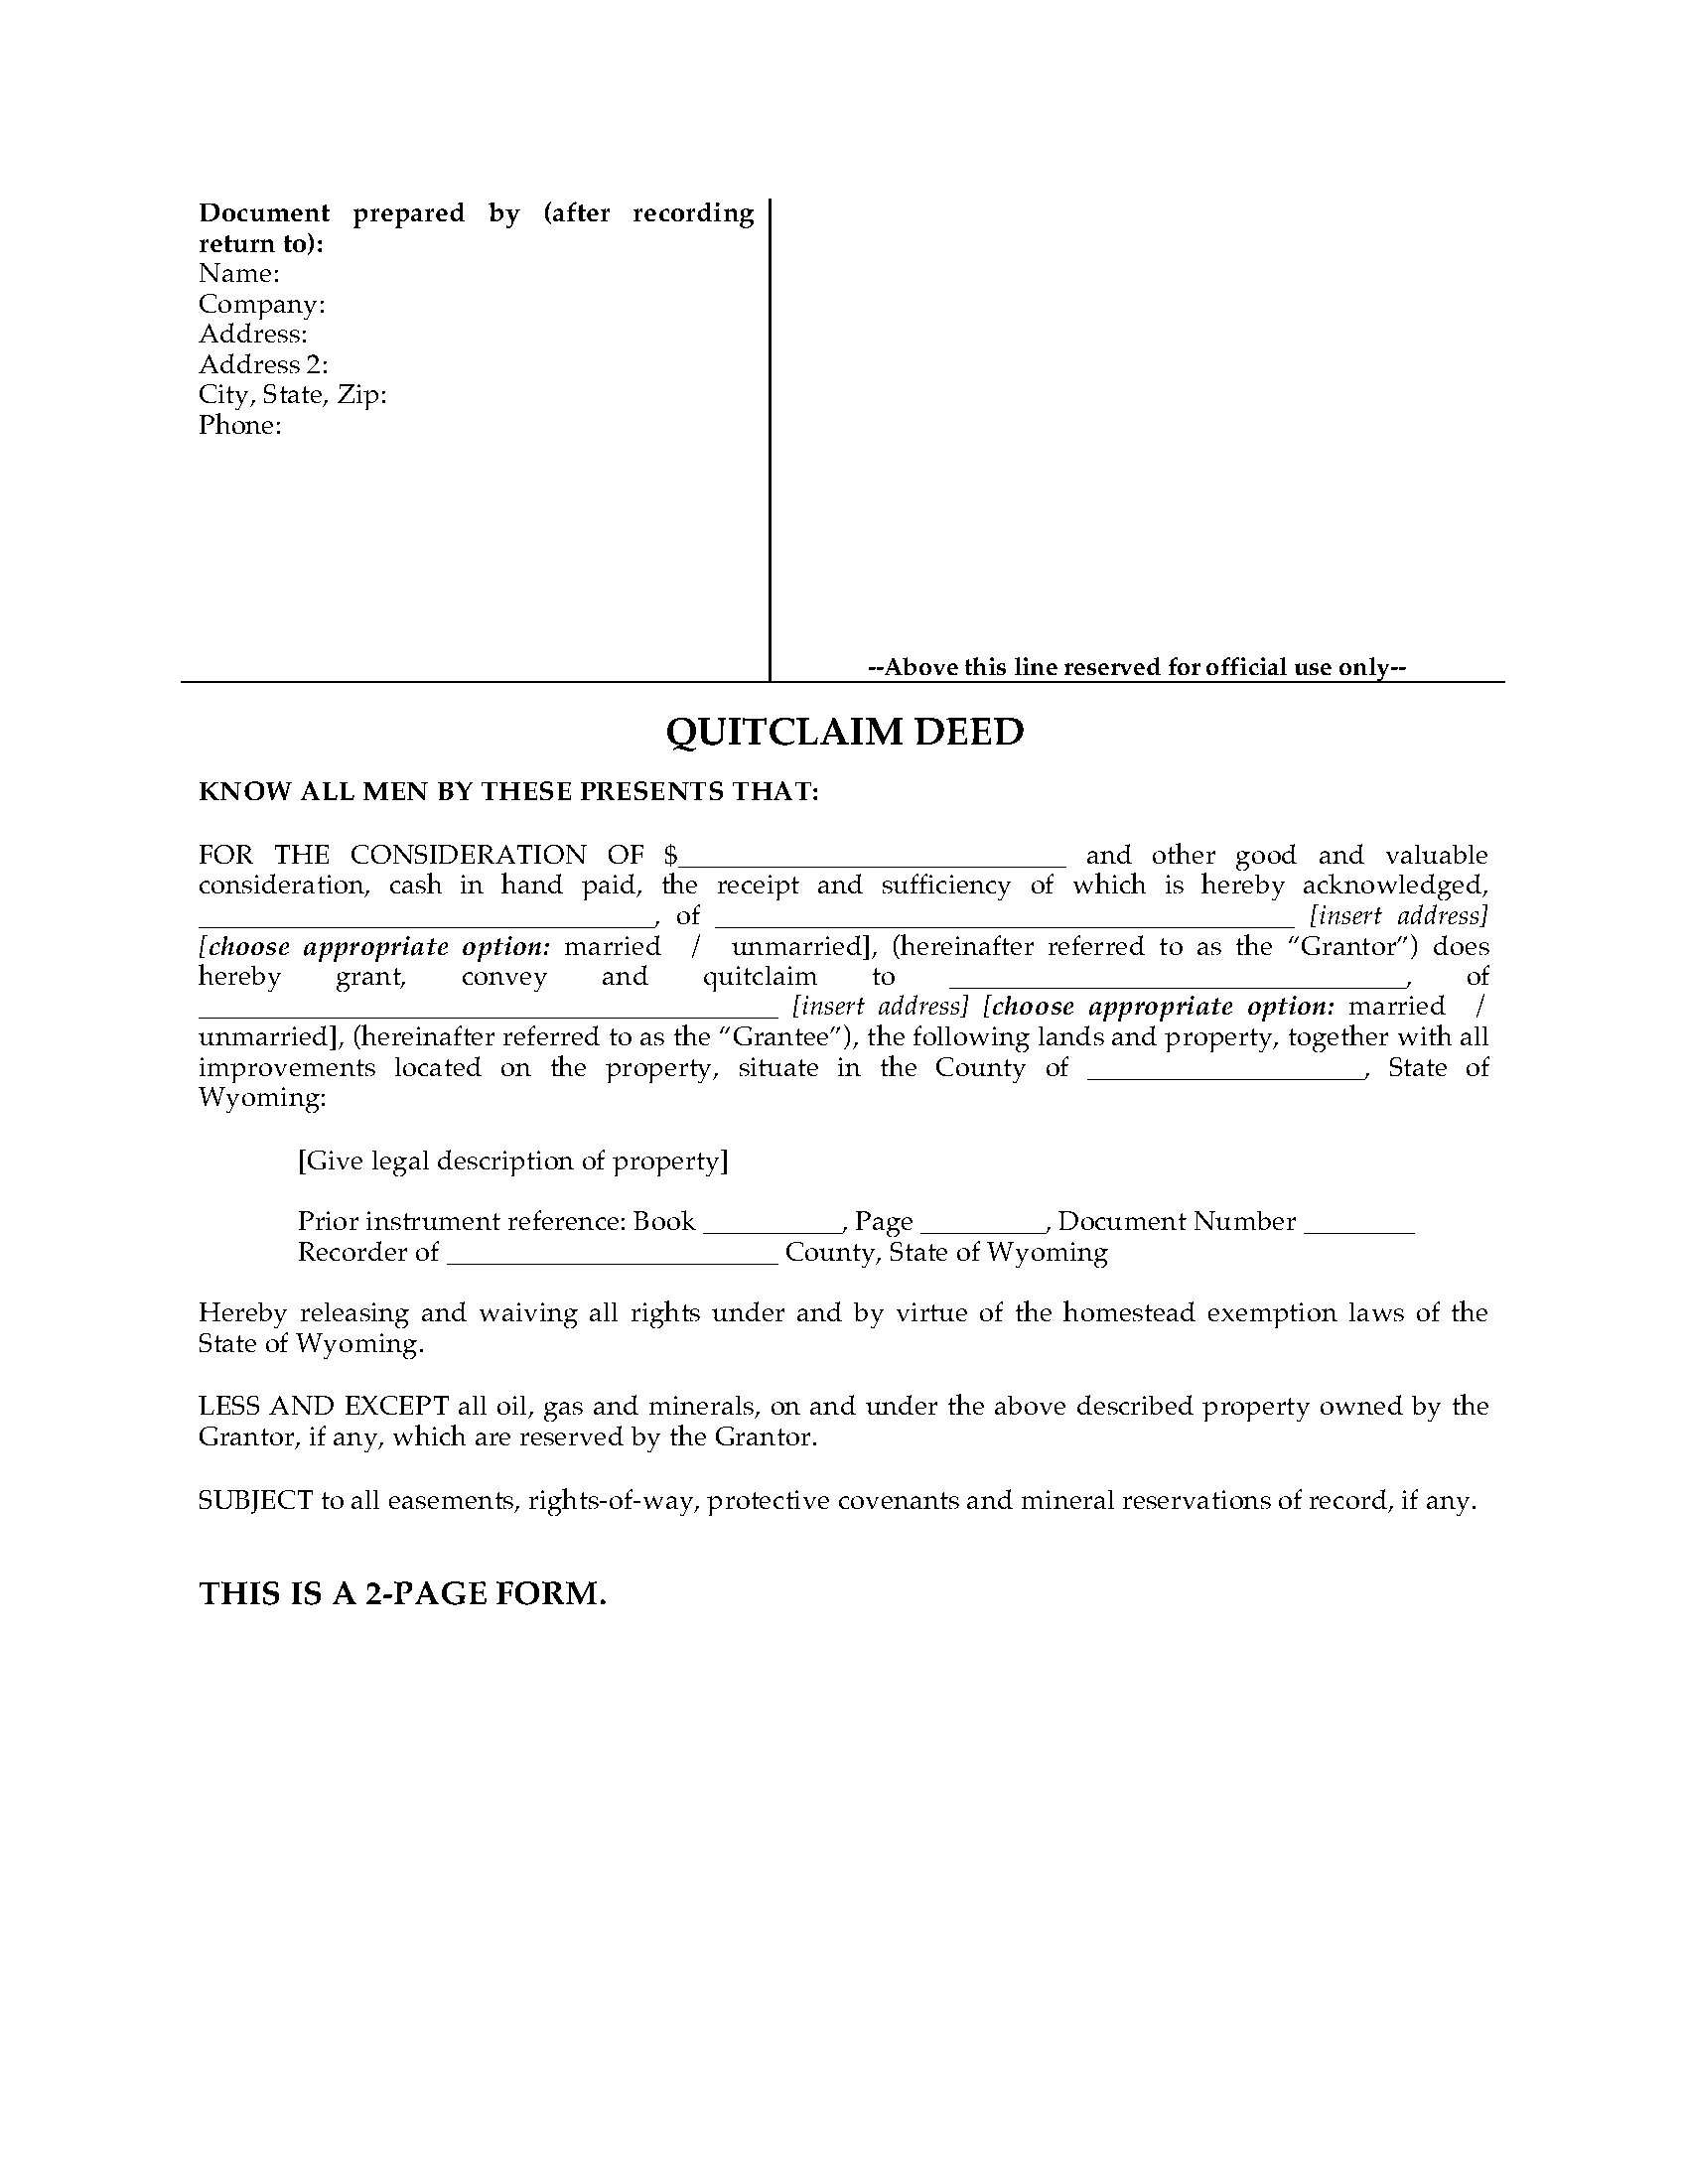 wyoming-quitclaim-deed-legal-forms-and-business-templates-megadox